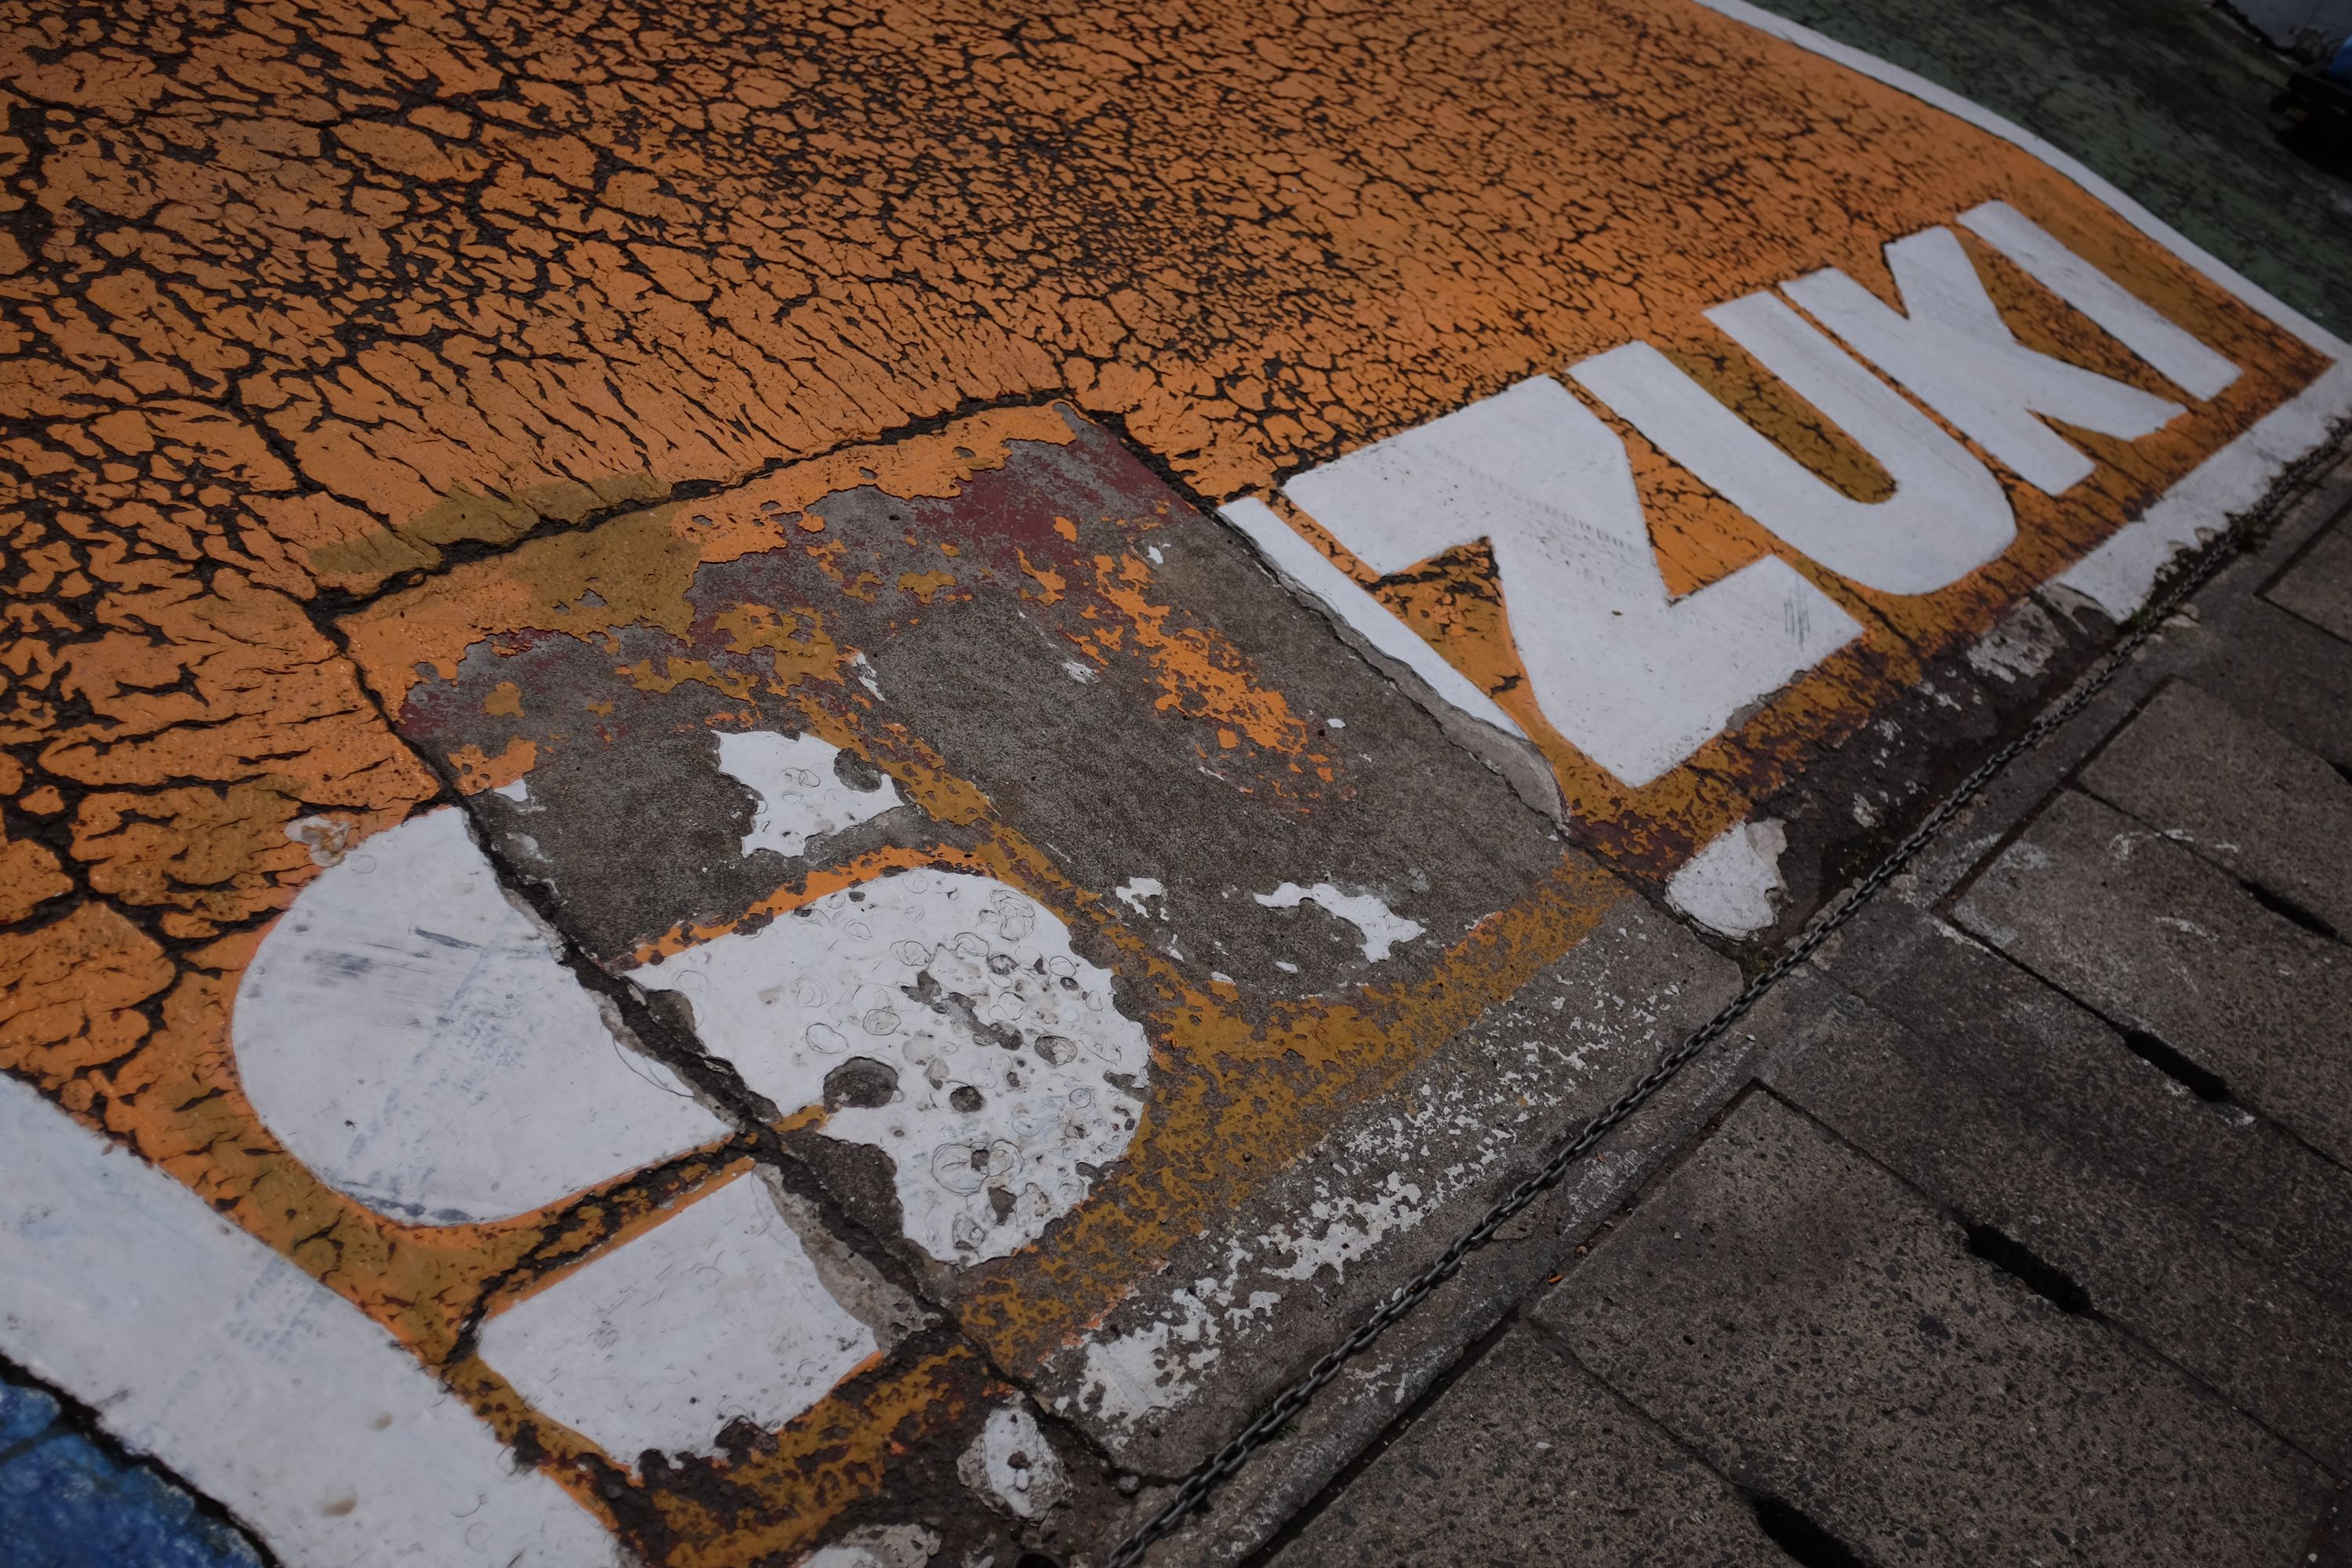 A faded yellow Suzuki sign painted on the ground.